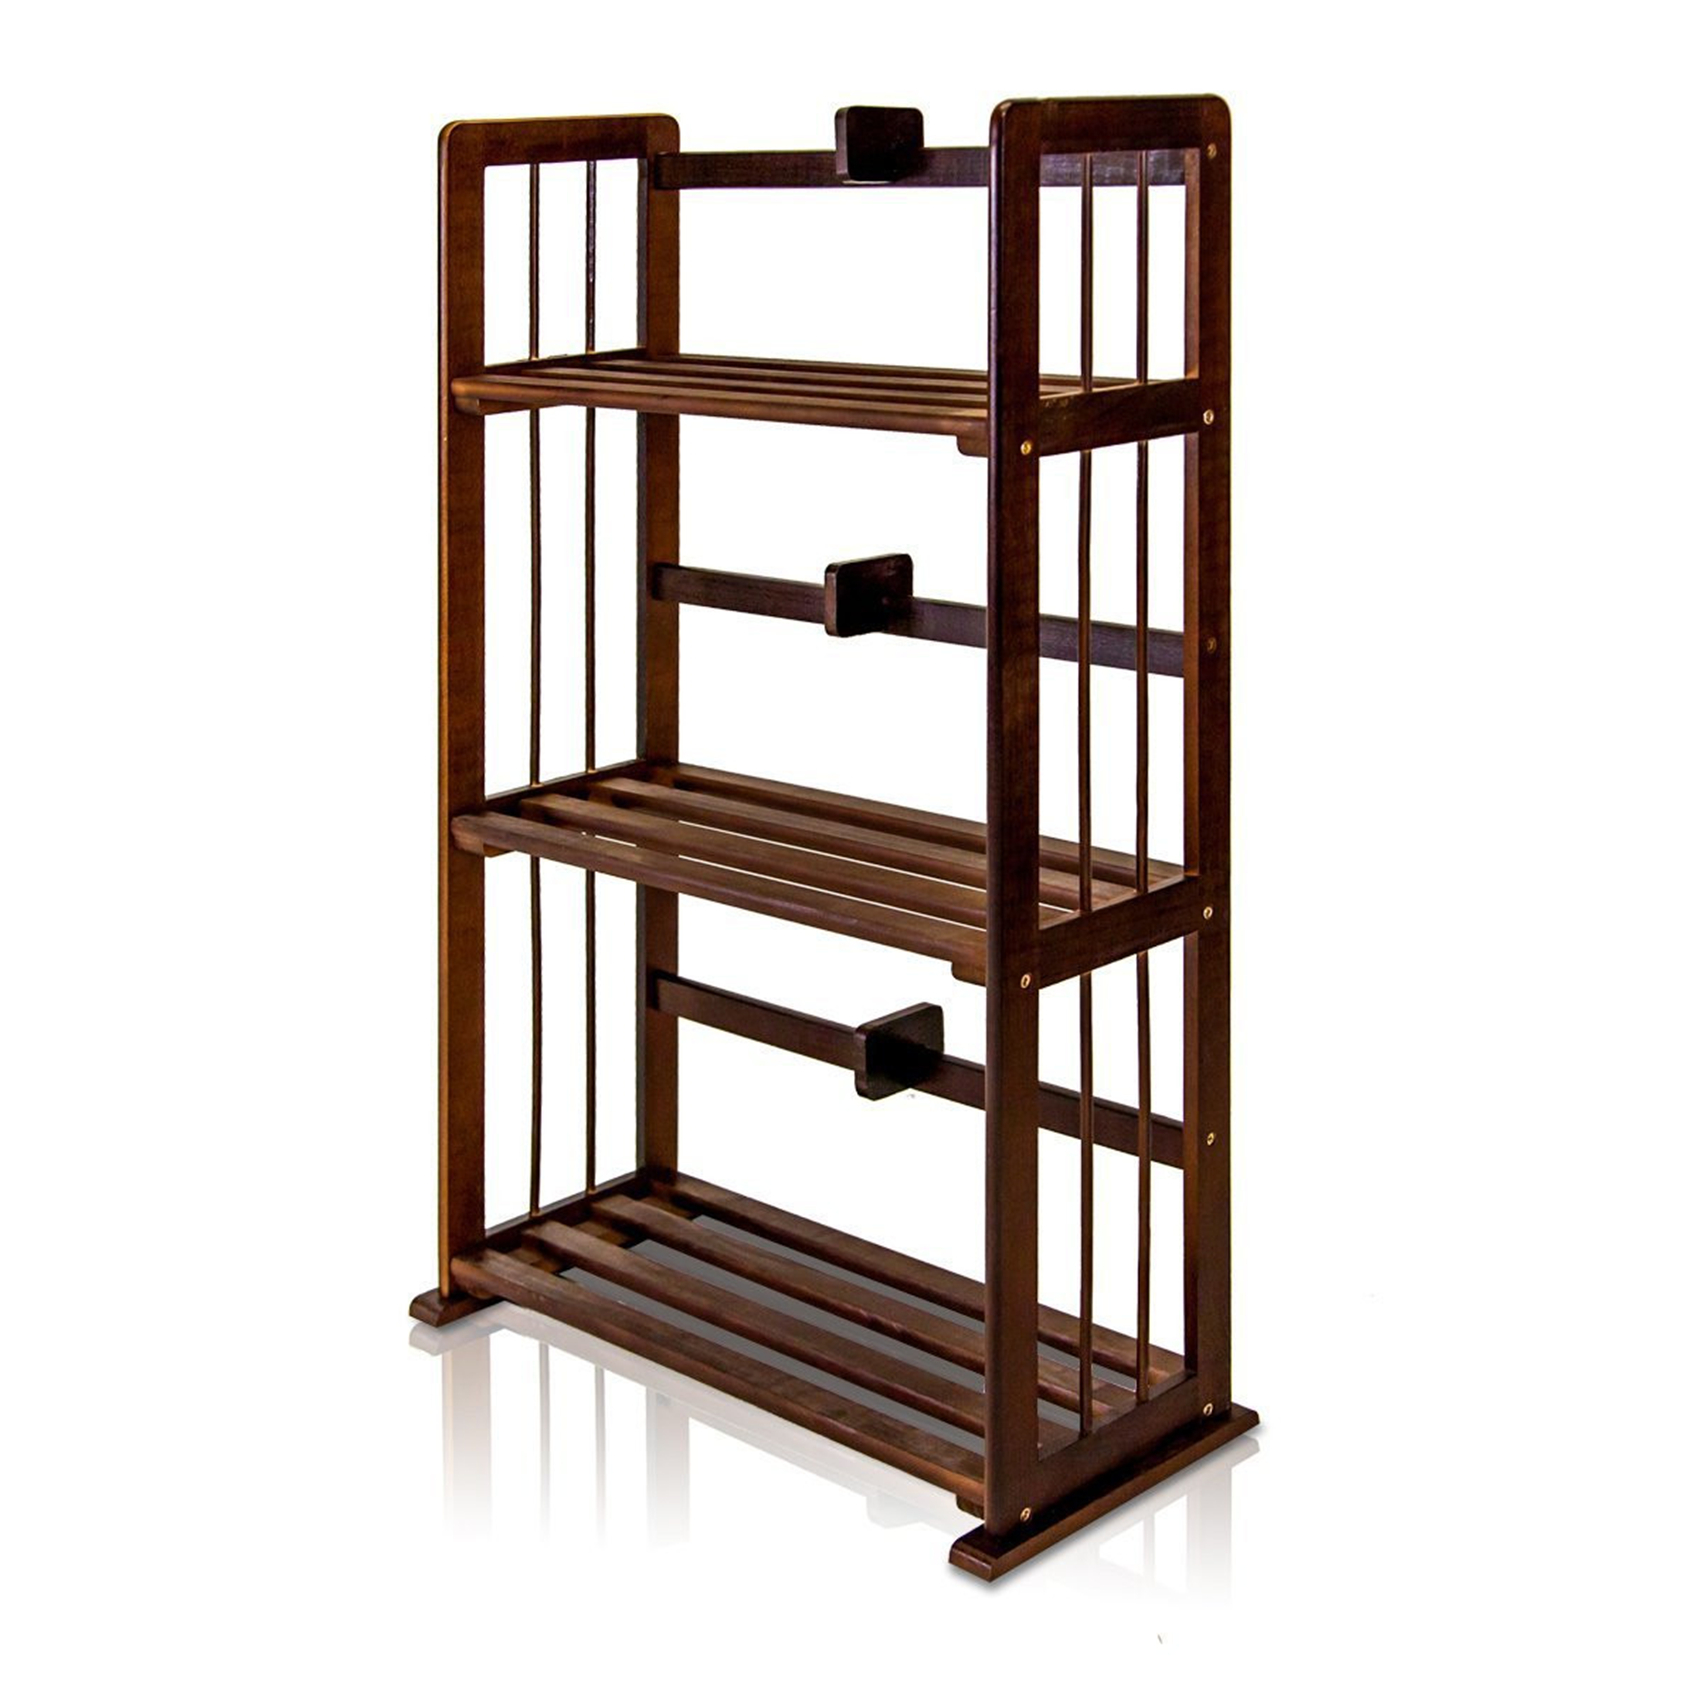 European-style modern three-layer shelf made of thick solid wood is stable and durable